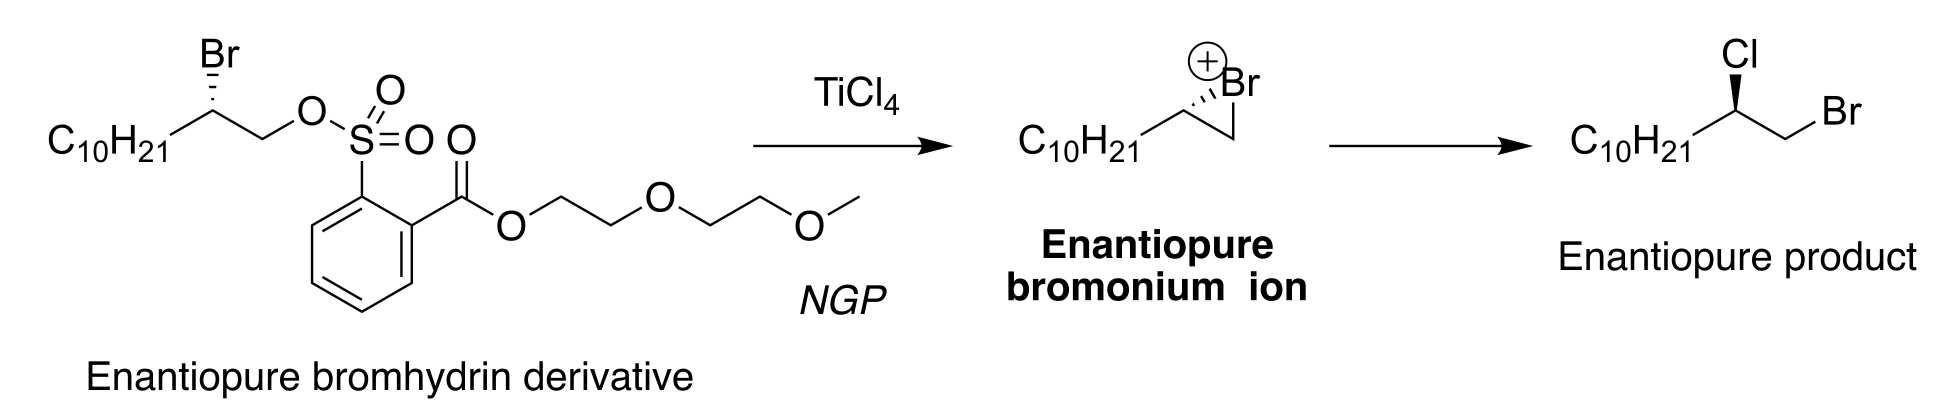 The Generation and Trapping of Enantiopure Bromonium Ions